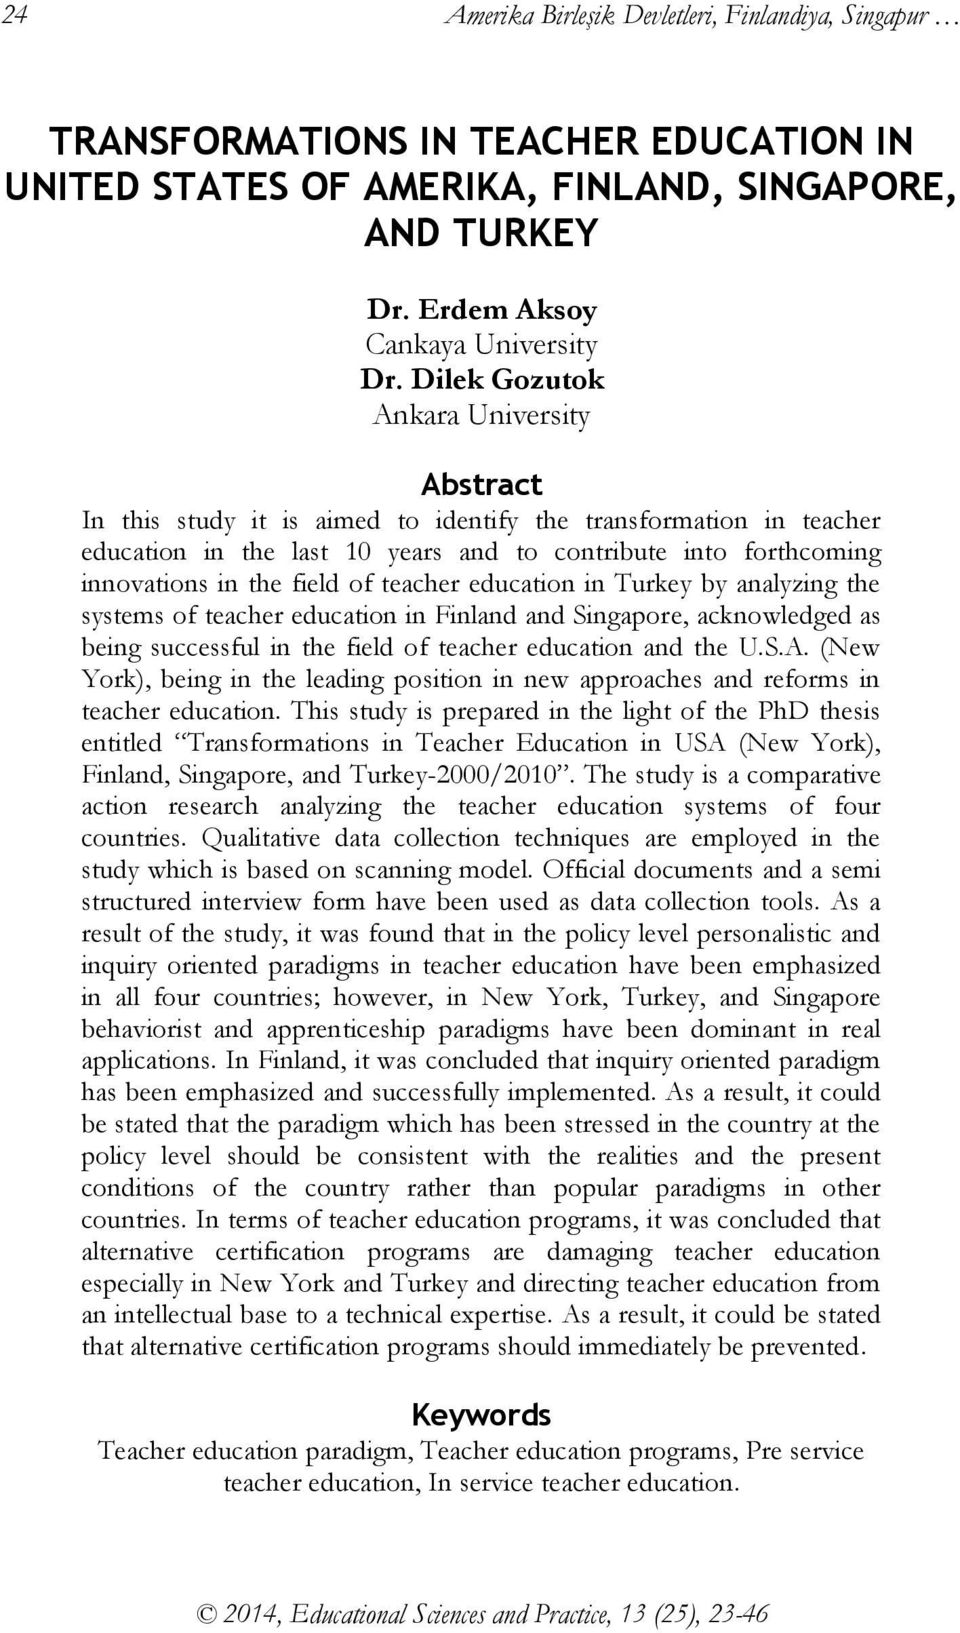 of teacher education in Turkey by analyzing the systems of teacher education in Finland and Singapore, acknowledged as being successful in the field of teacher education and the U.S.A.